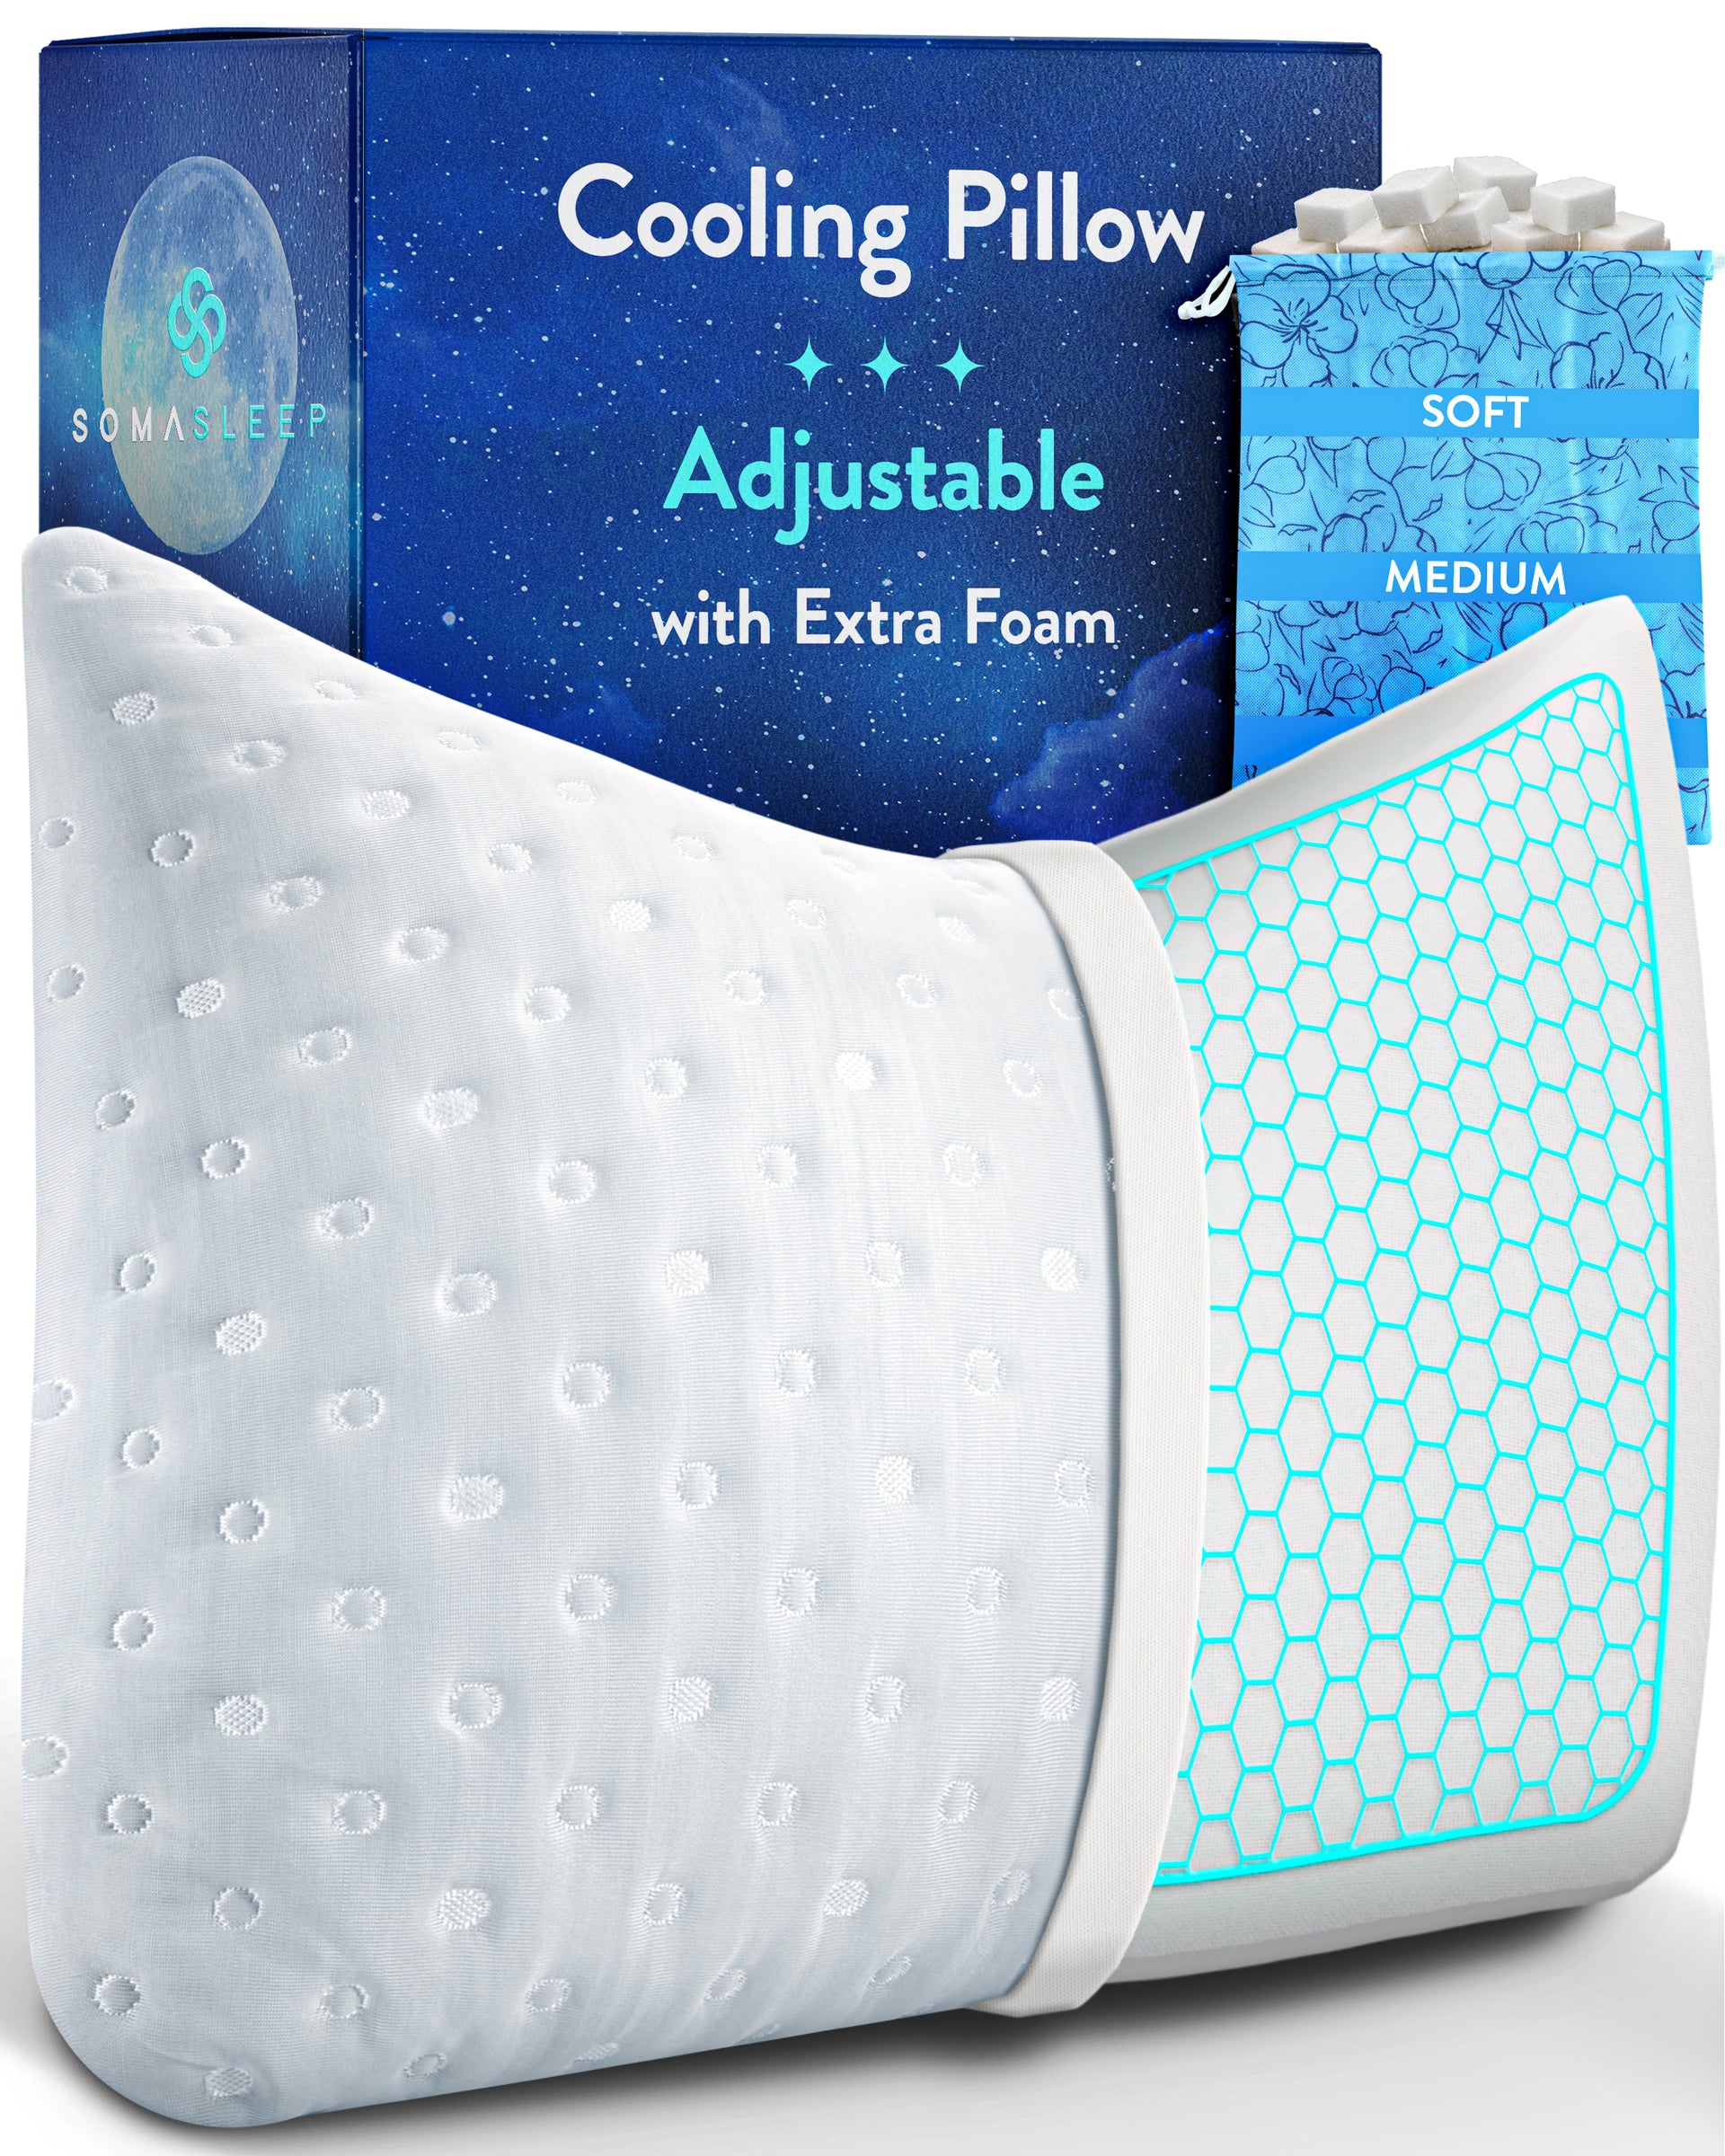 SelectSoma Bath Pillows for Tub Neck and Back Support - Bath Pillow for  Bathtub - Bath Tub Pillow Headrest - Spa Pillow for Bathtub and Hot Tub 